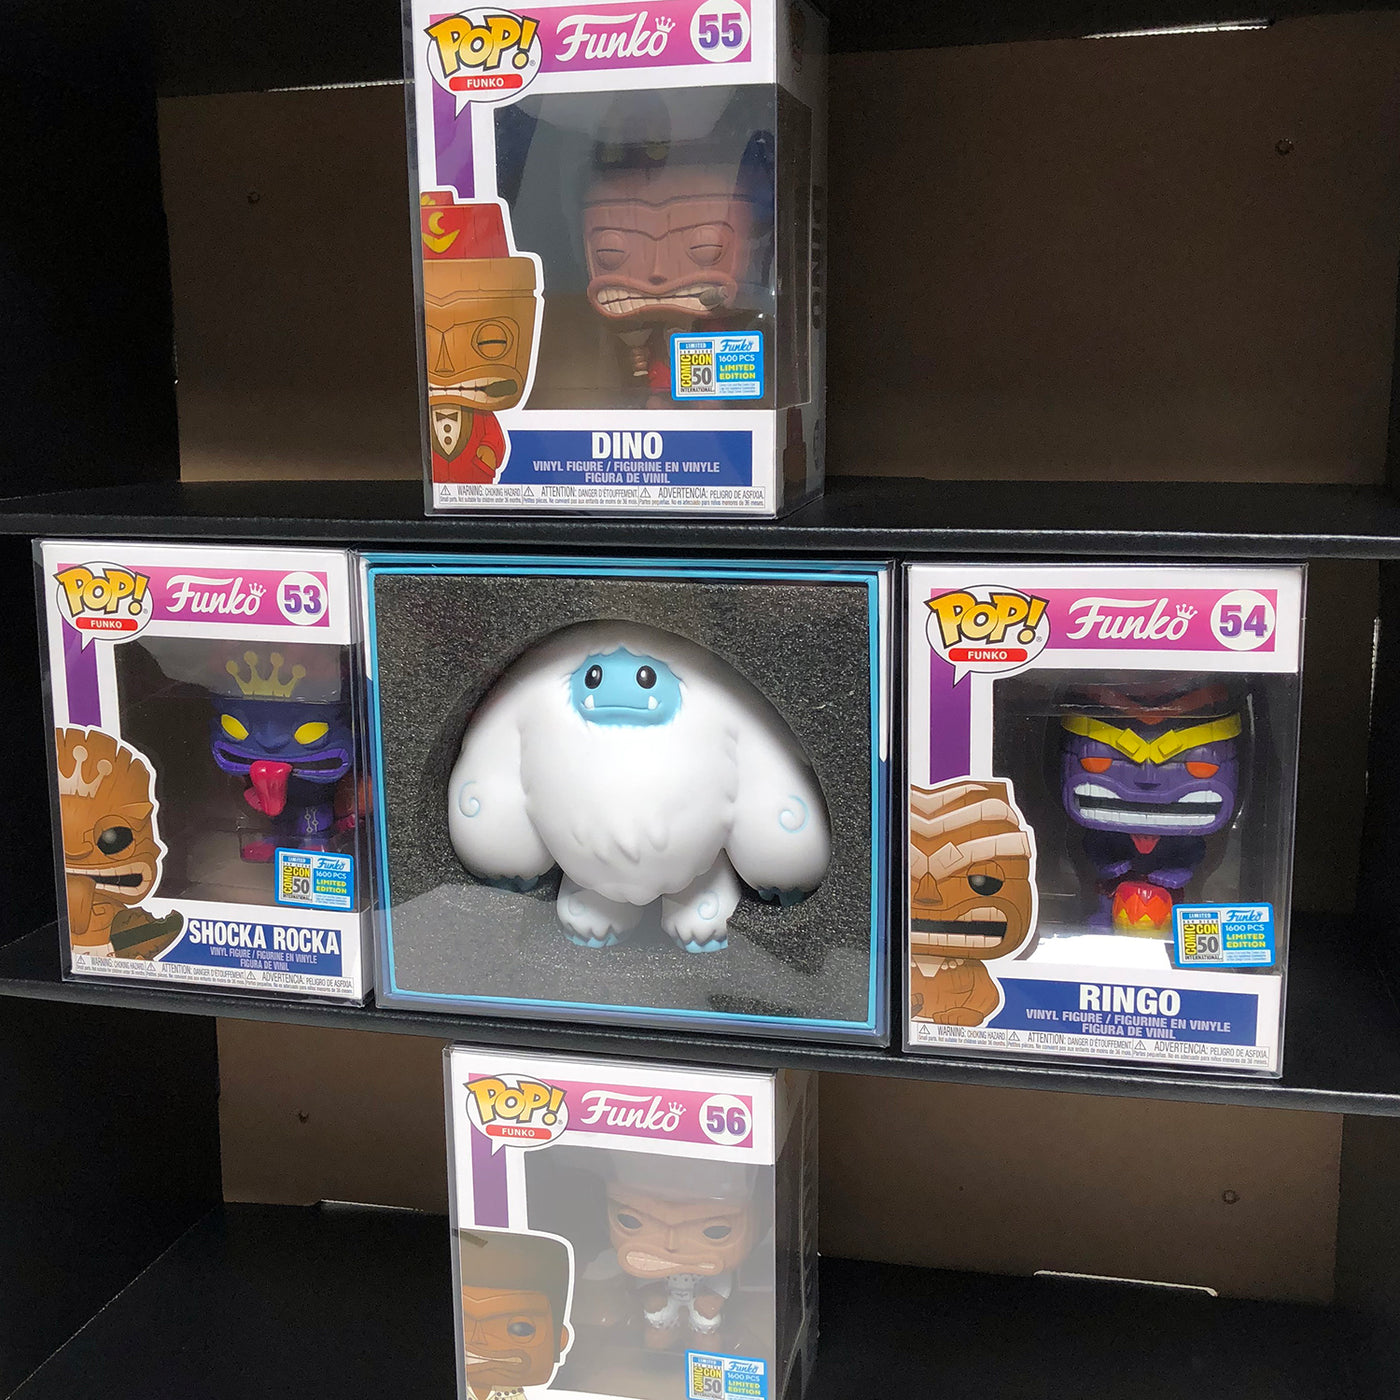 ABOMINABLE TOYS Chomp Protectors for Chomp Vinyl Collectible Figures, 50mm thick